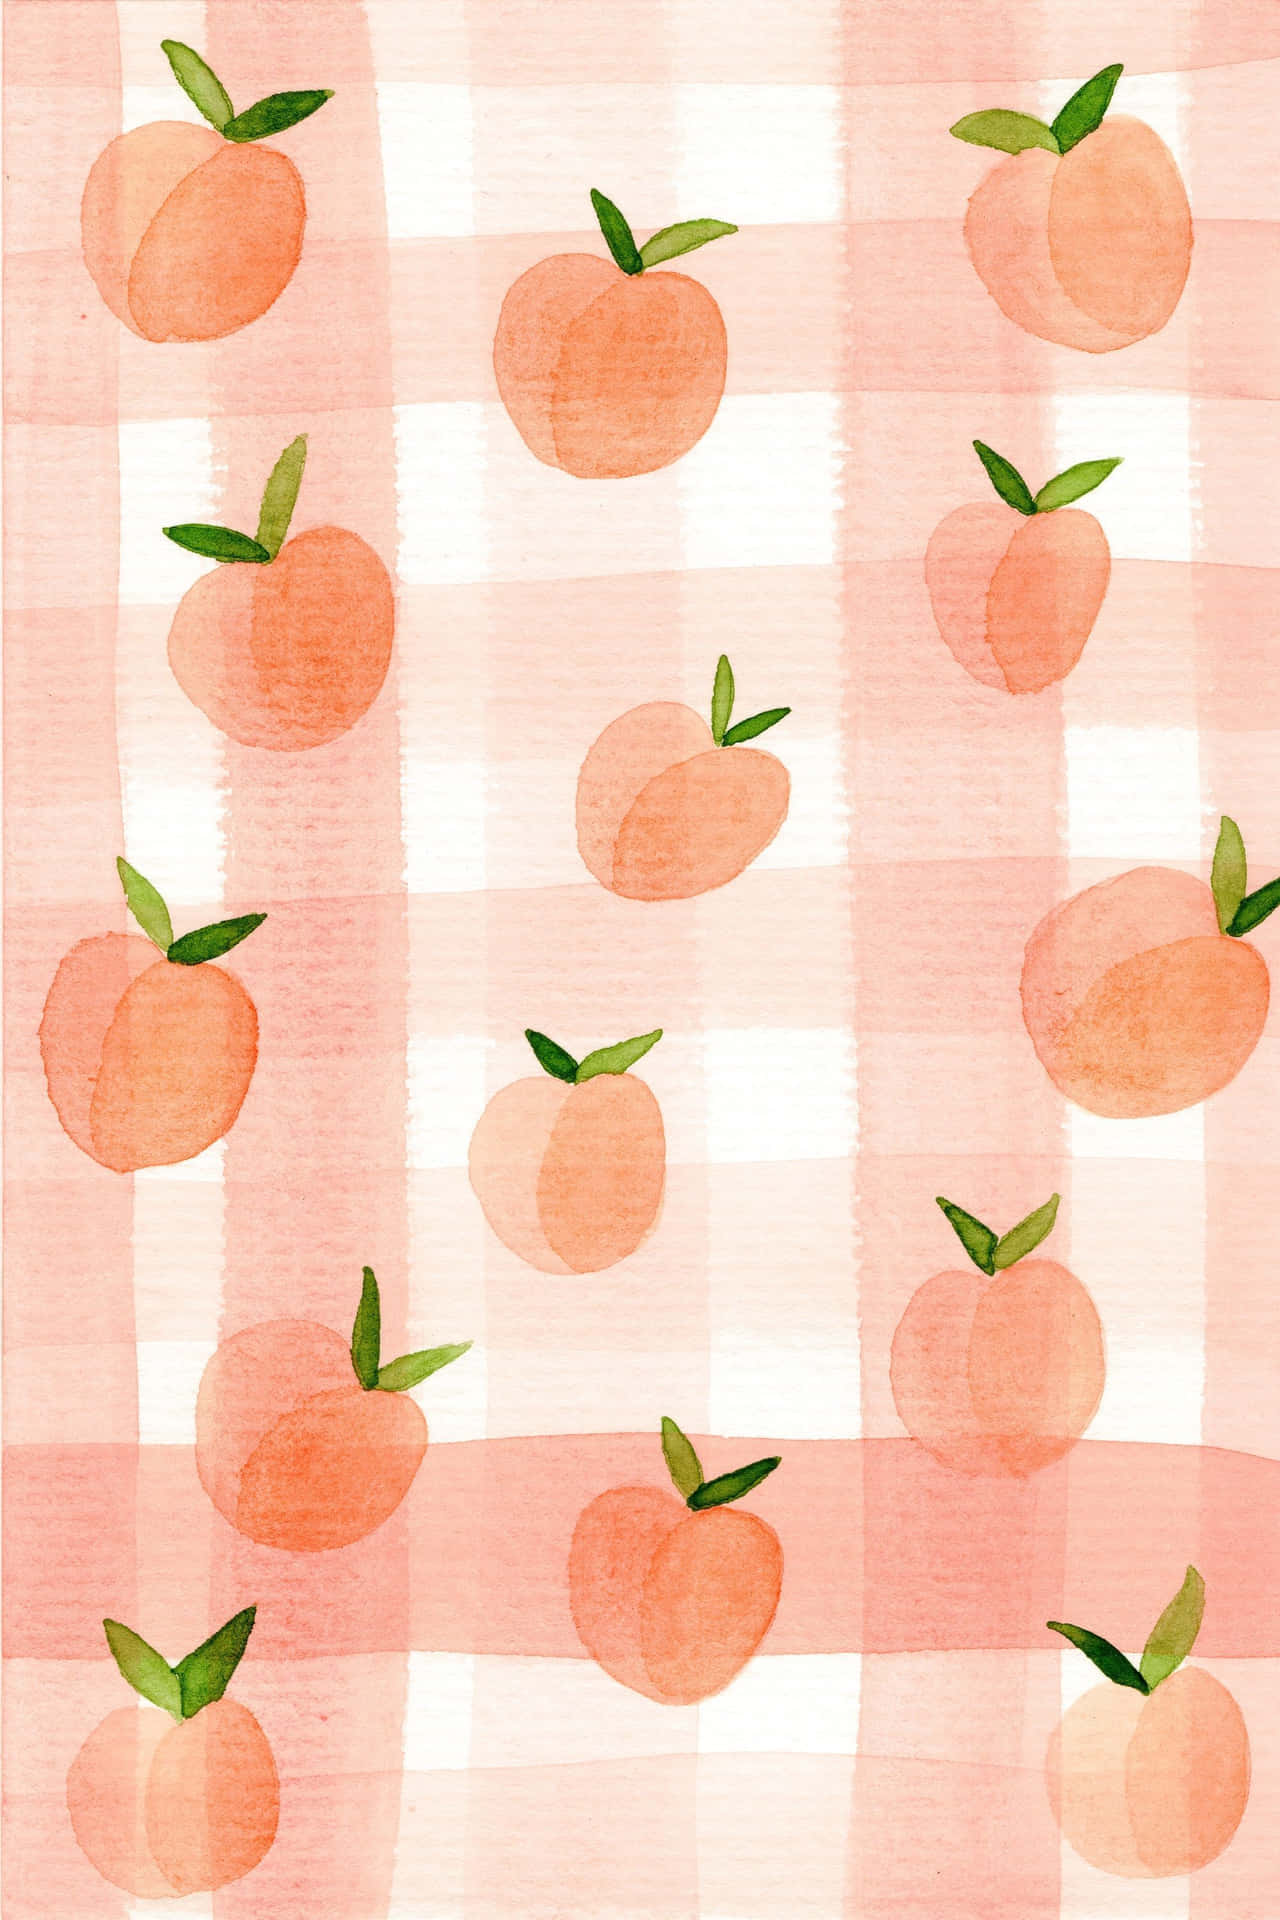 Give Your iPhone A Burst Of Color With This Peach iPhone Wallpaper Wallpaper